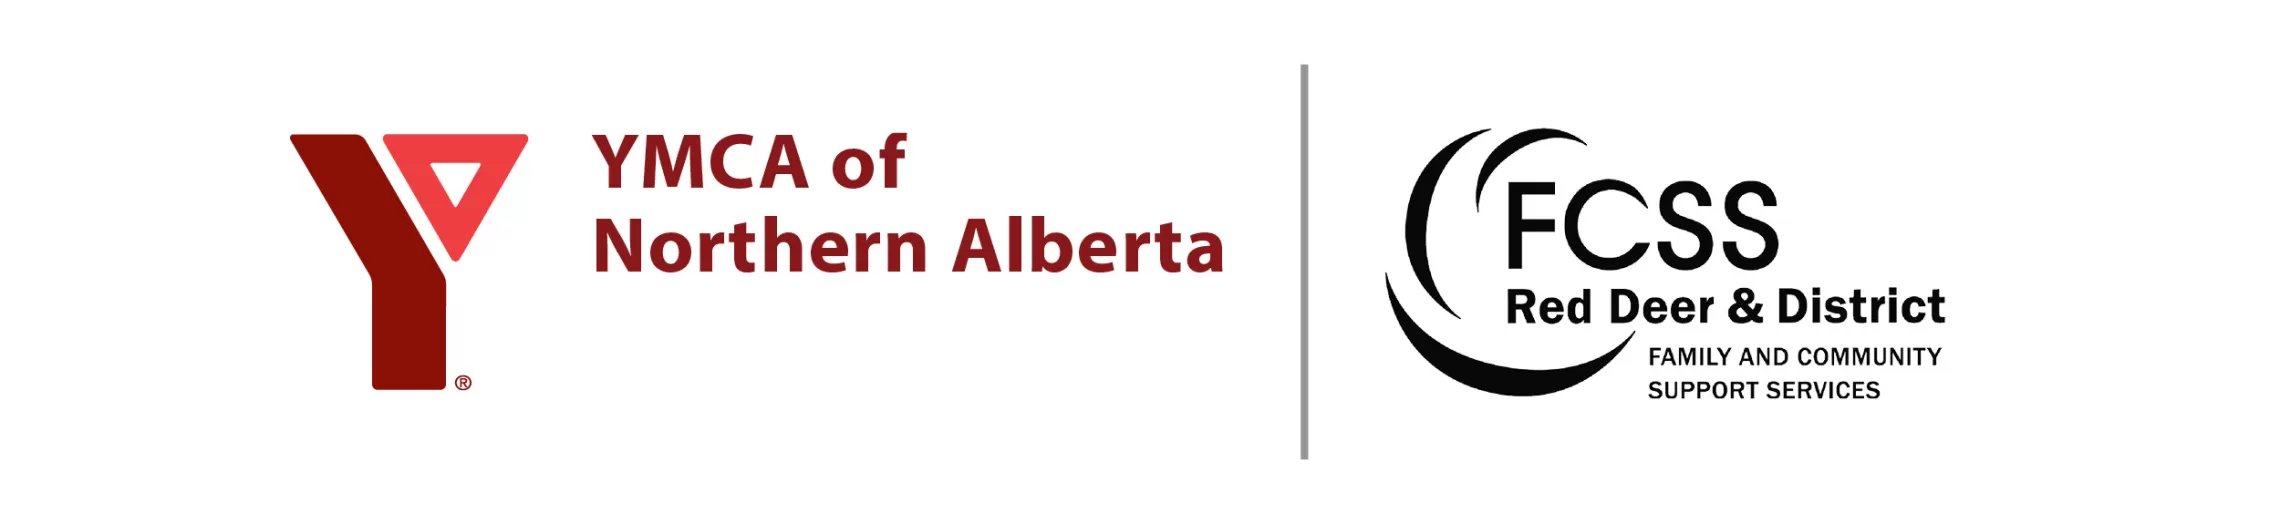 YMCA of Northern Alberta and Red Deer and District Family and Community Support Services.